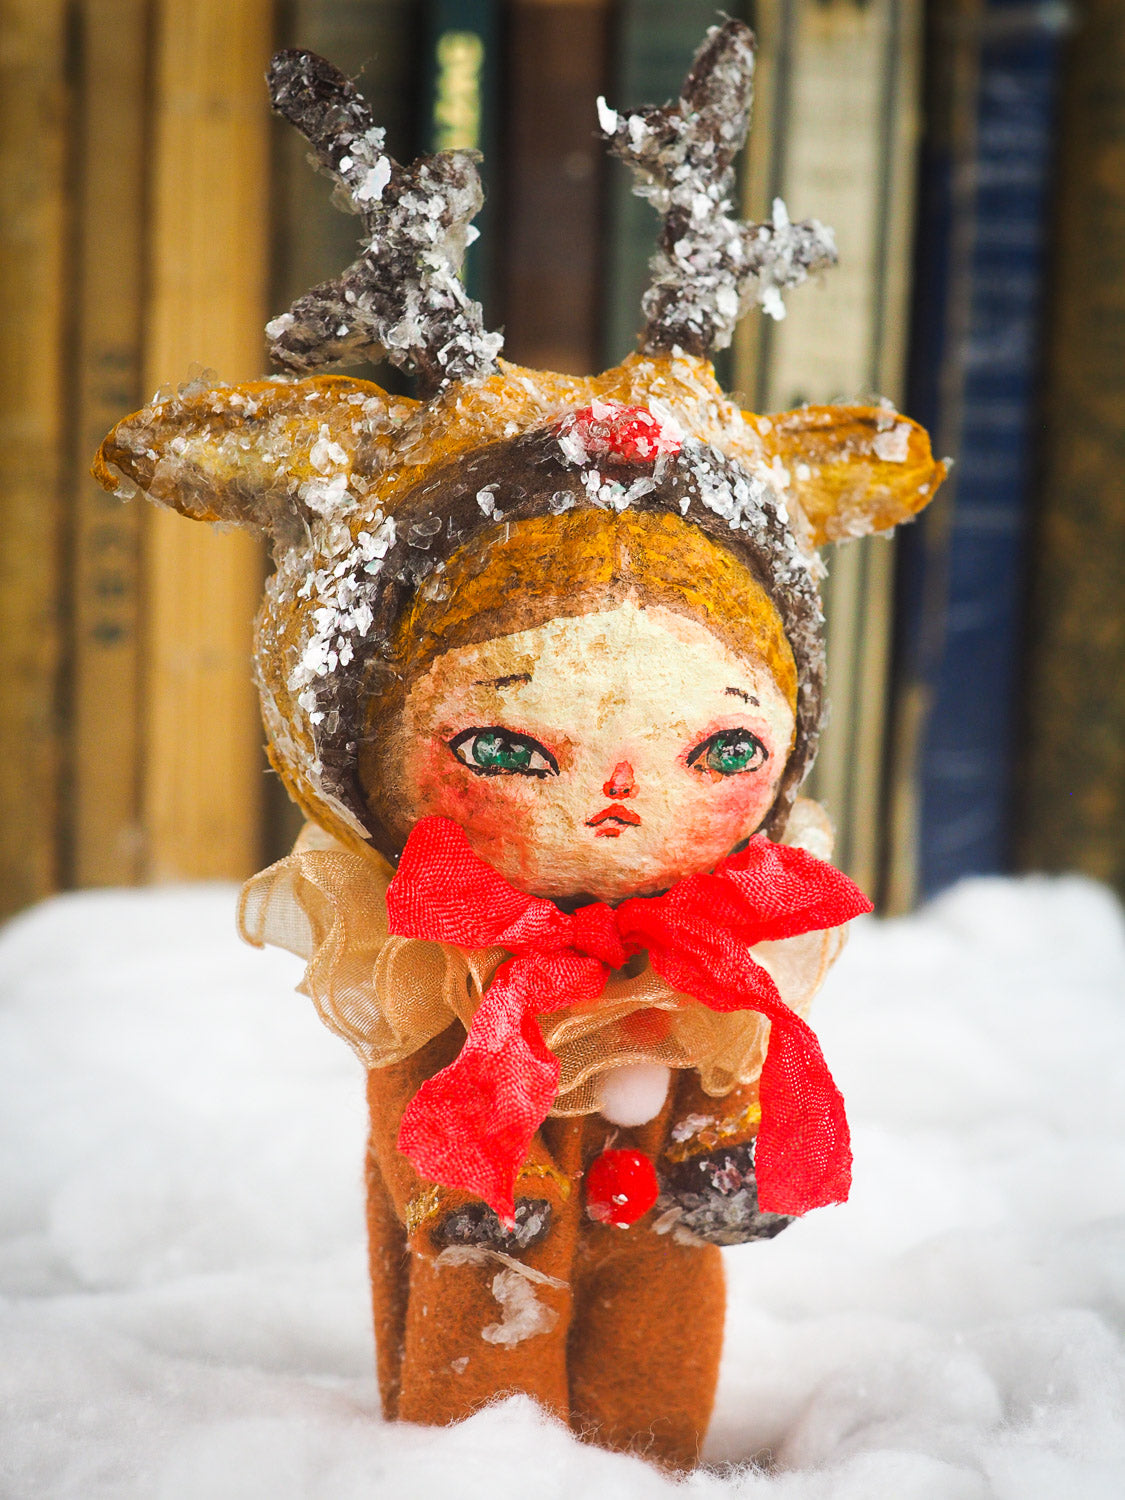 Rudolph the red nose reindeer Christmas tree ornament doll by Danita. Handmade mini doll figurine for your holiday gift list.